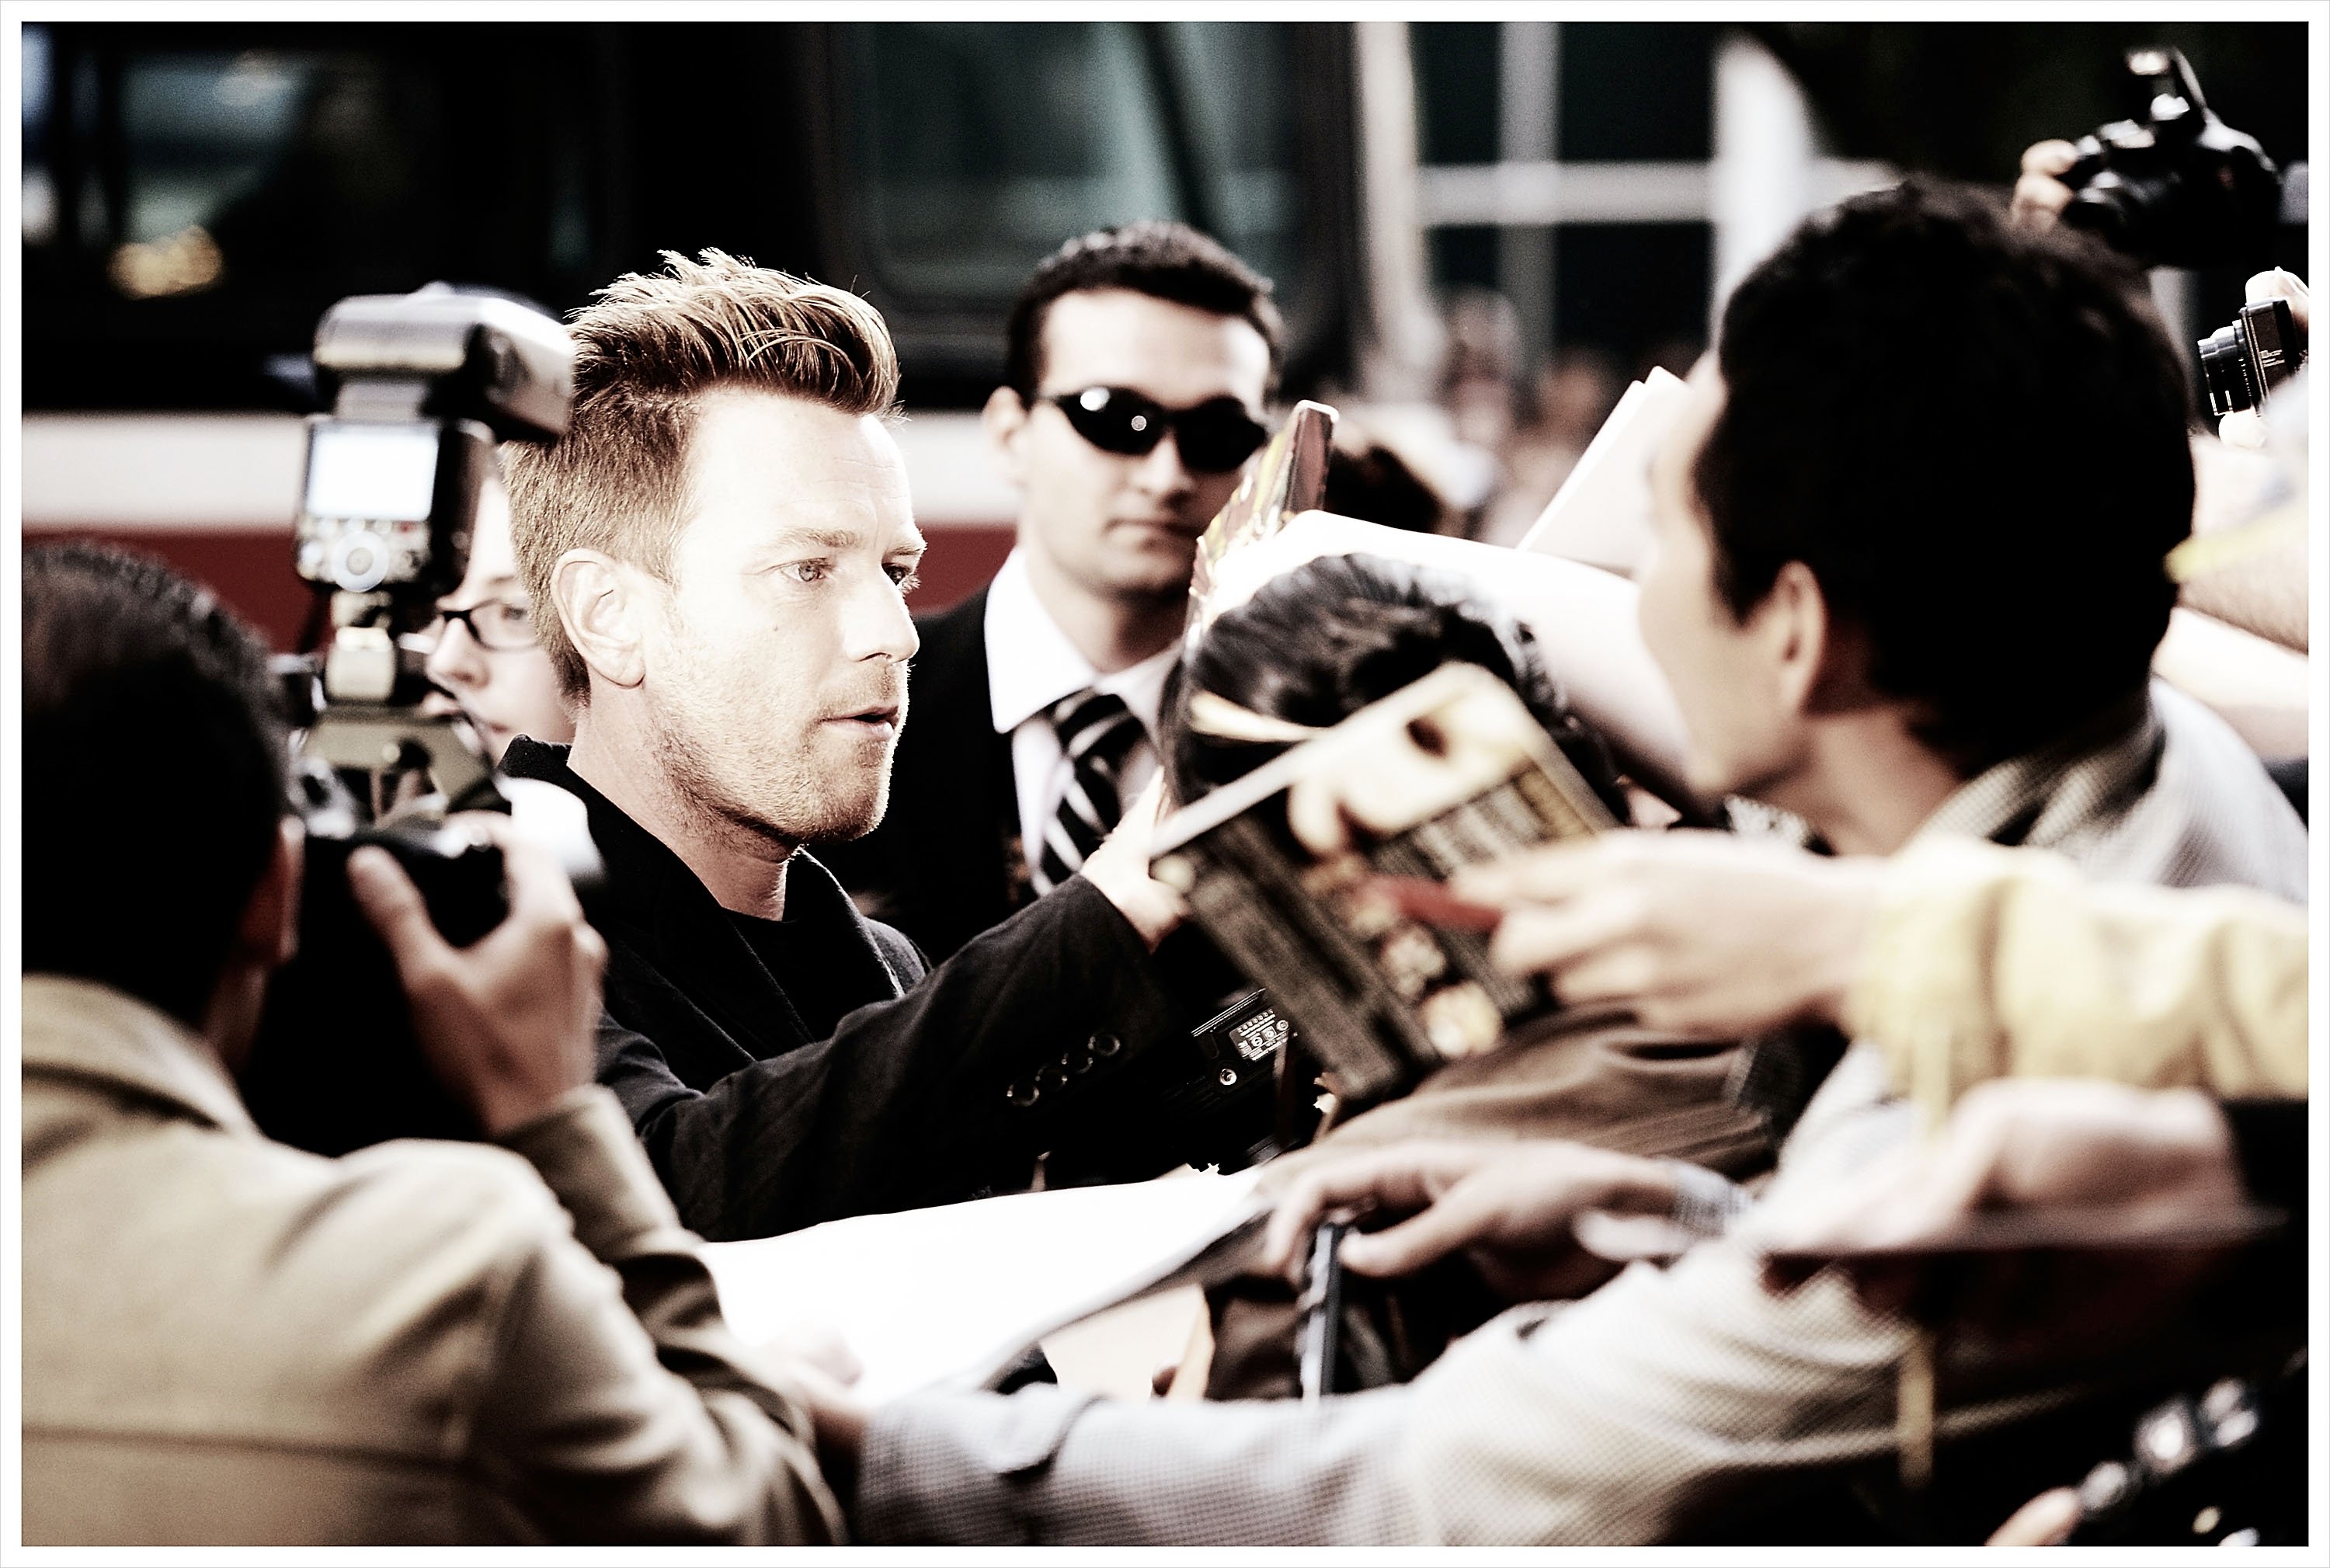 2012-09-09-TIFF-The-Impossible-Premiere-067.jpg